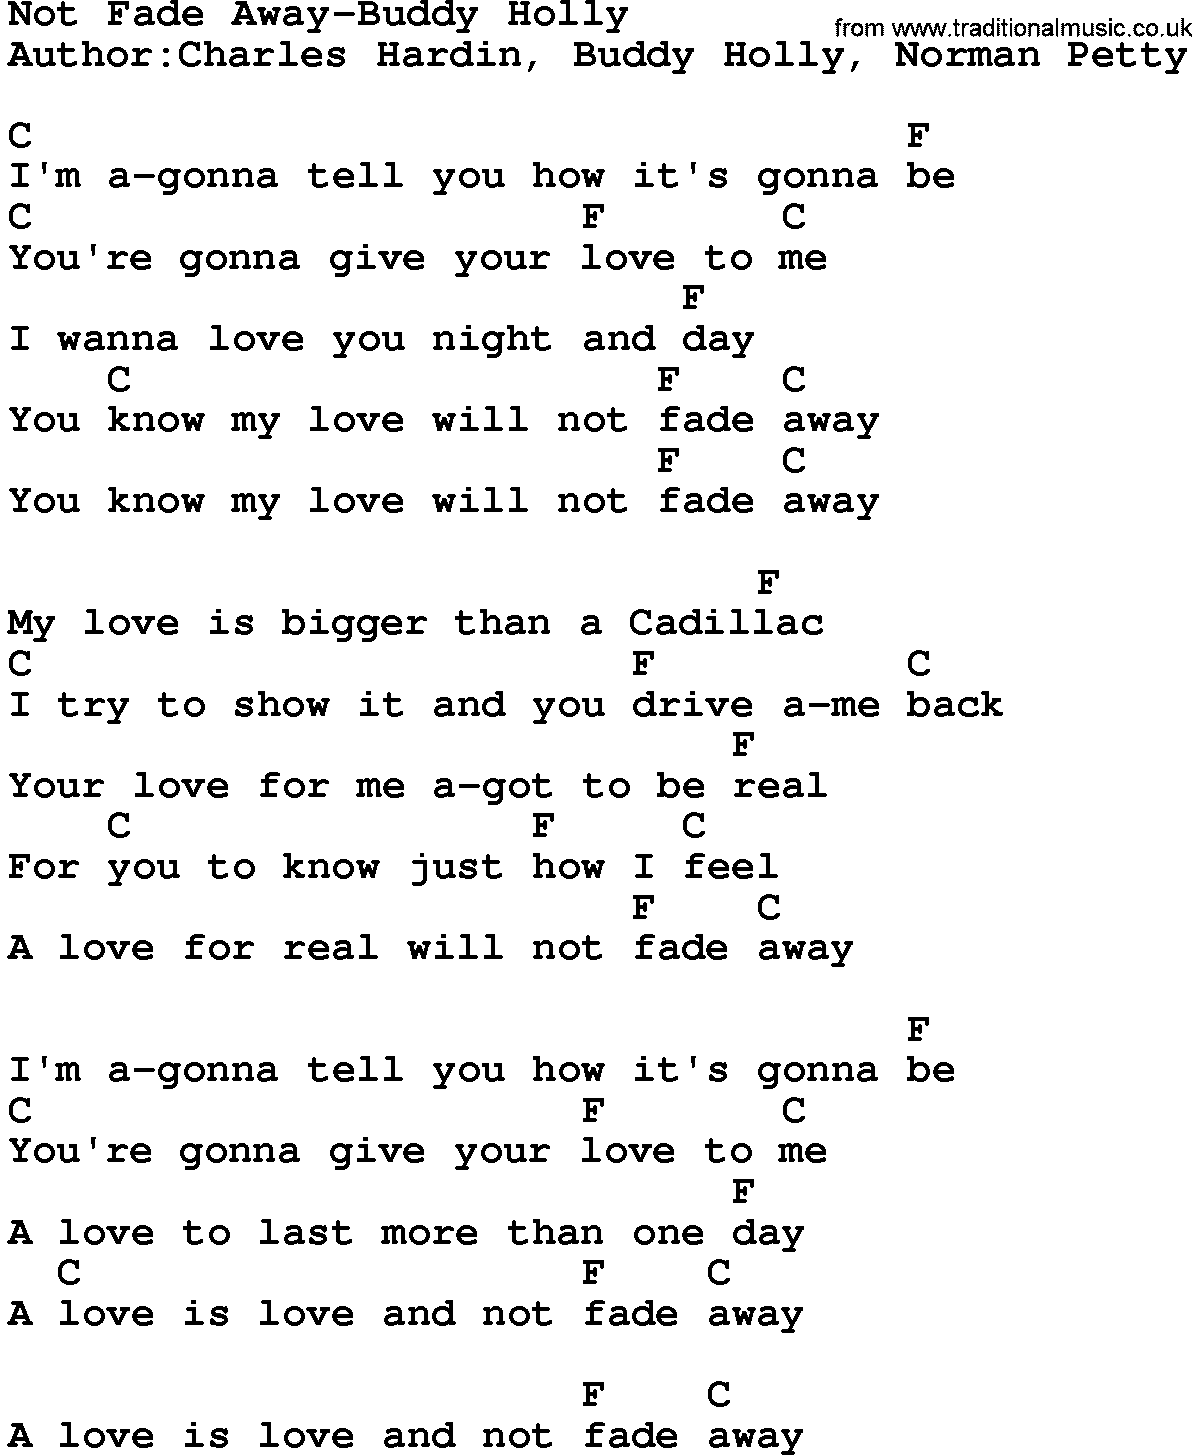 Country music song: Not Fade Away-Buddy Holly lyrics and chords